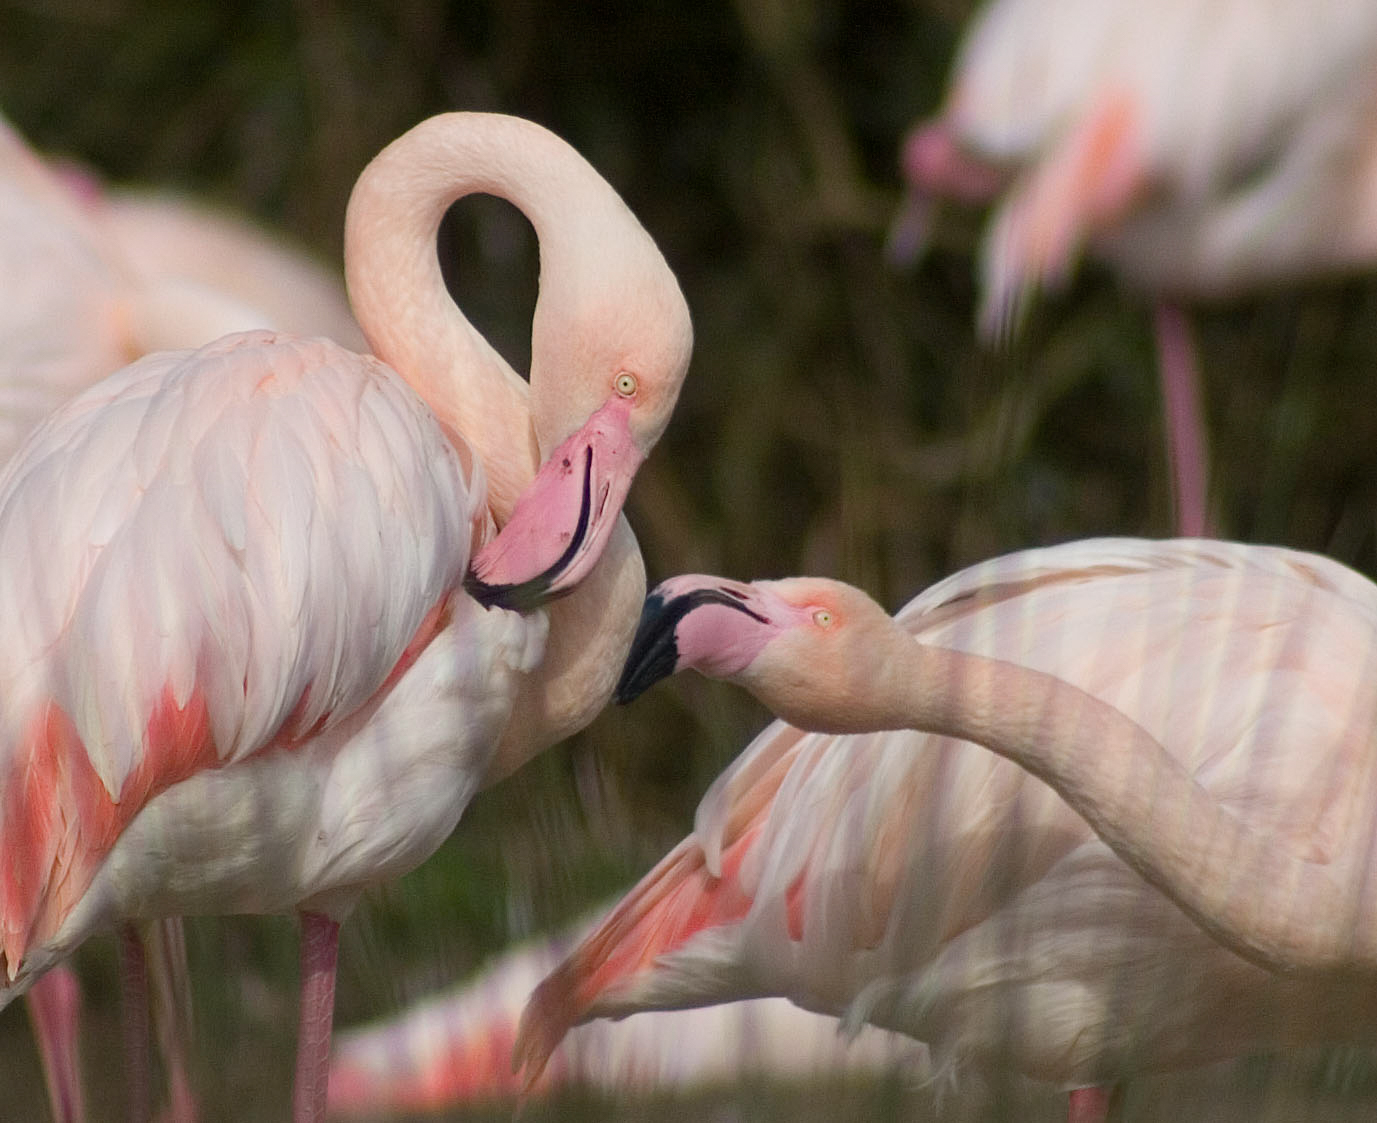 WWT Slimbridge wins Gold for Research at the National Zoo and Aquarium Awards 2019